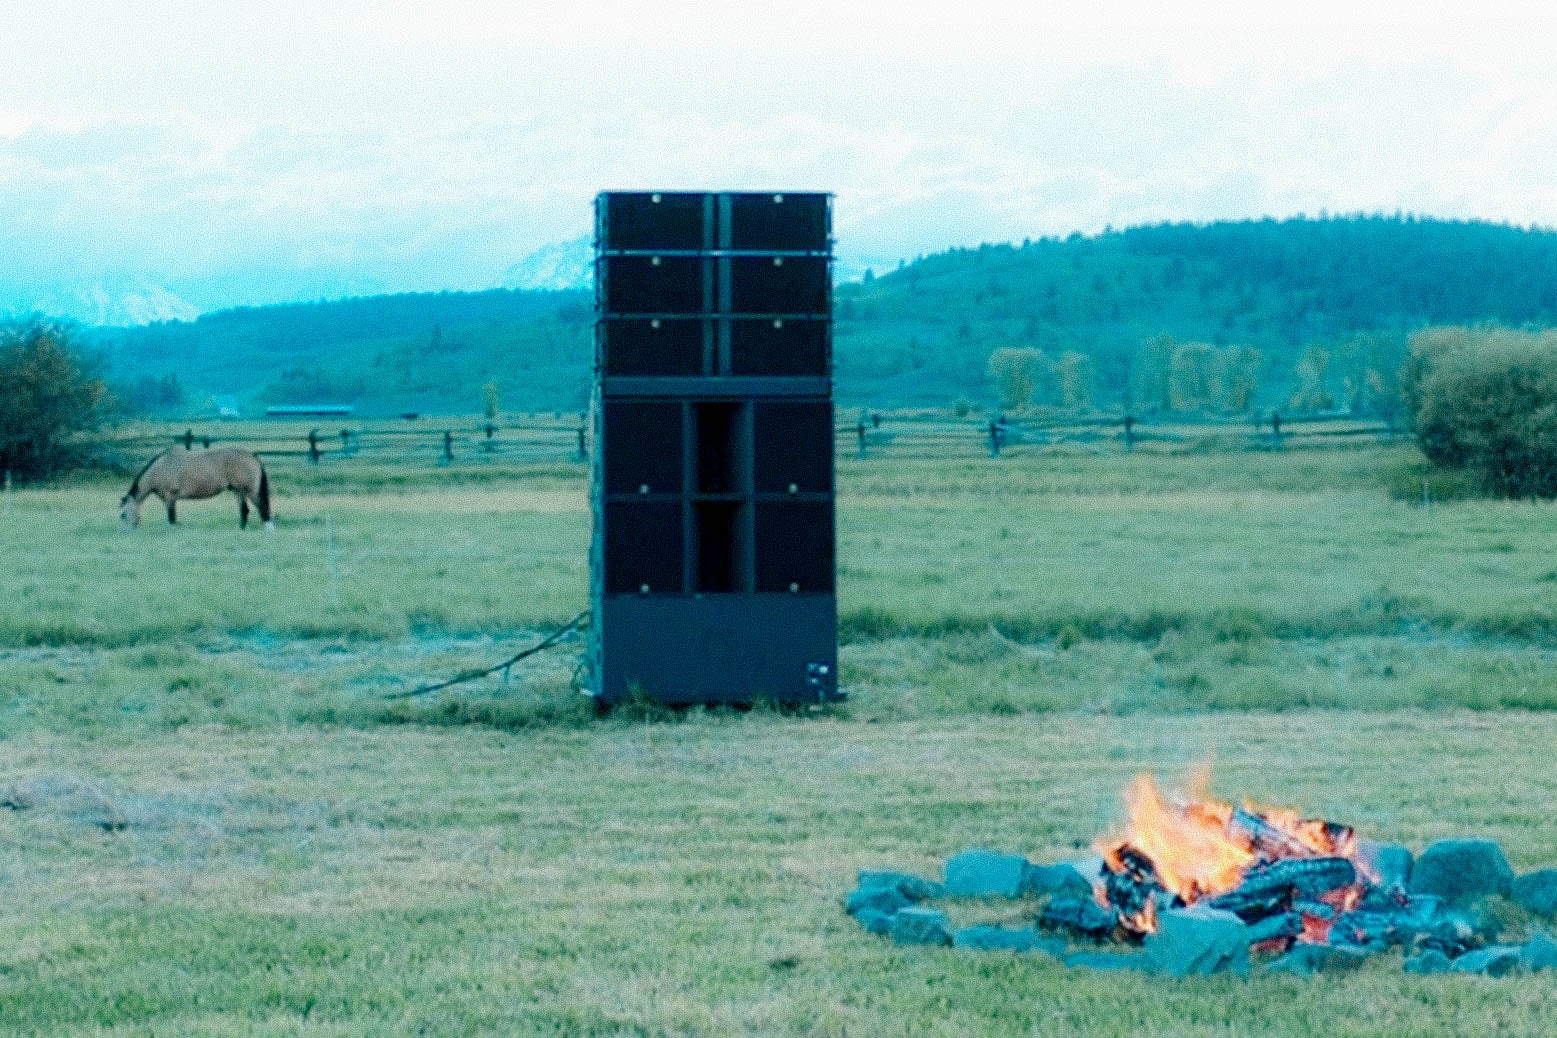 A field in Wyoming, the site of Kanye's listening party.